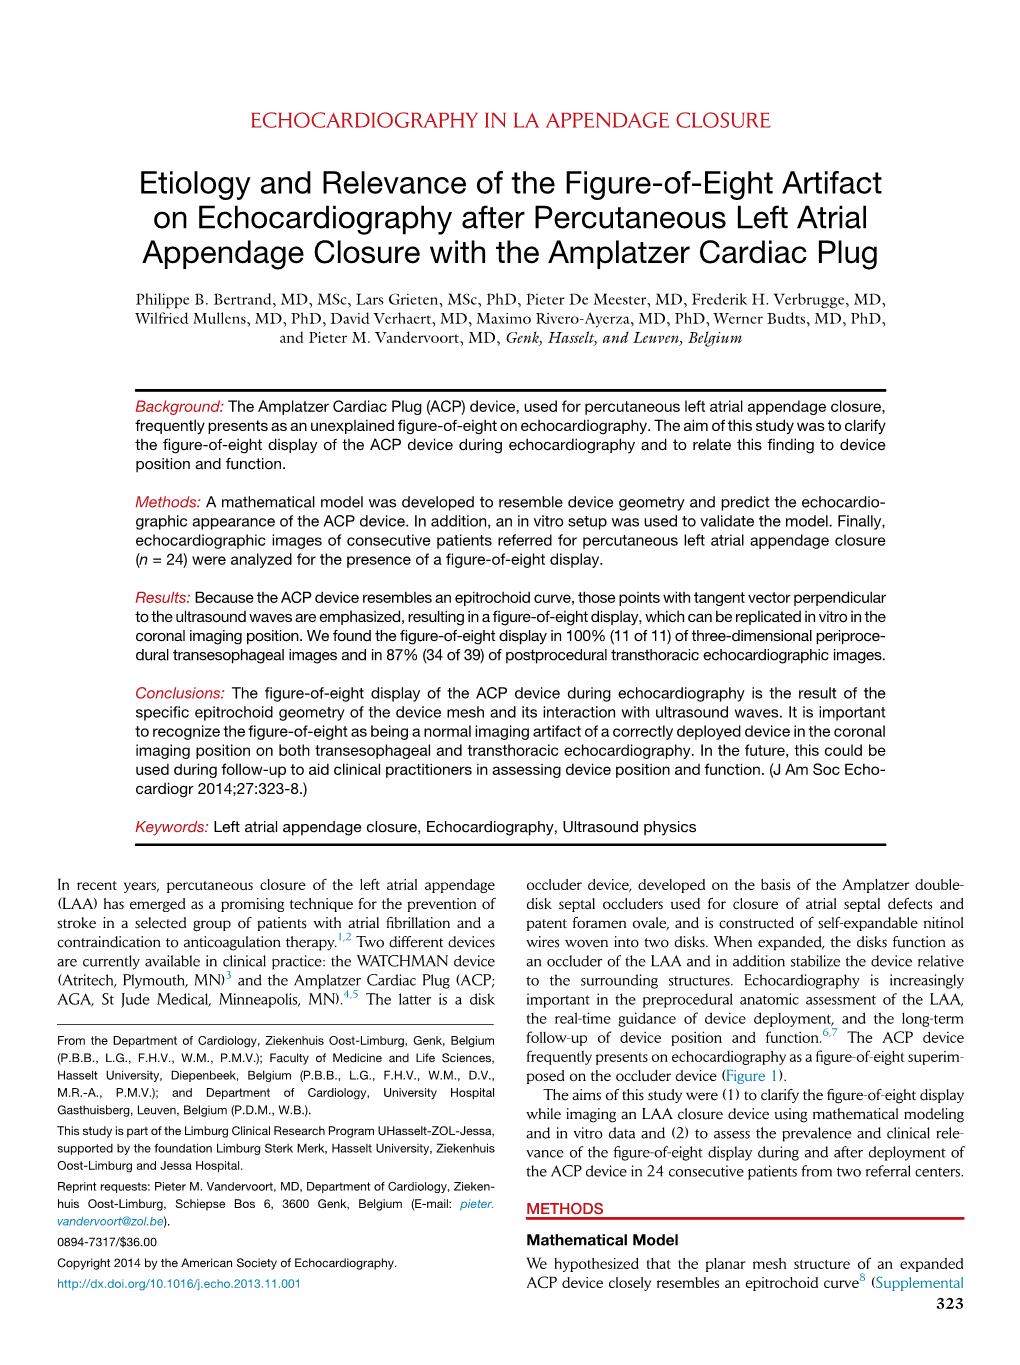 Etiology and Relevance of the Figure-Of-Eight Artifact on Echocardiography After Percutaneous Left Atrial Appendage Closure with the Amplatzer Cardiac Plug